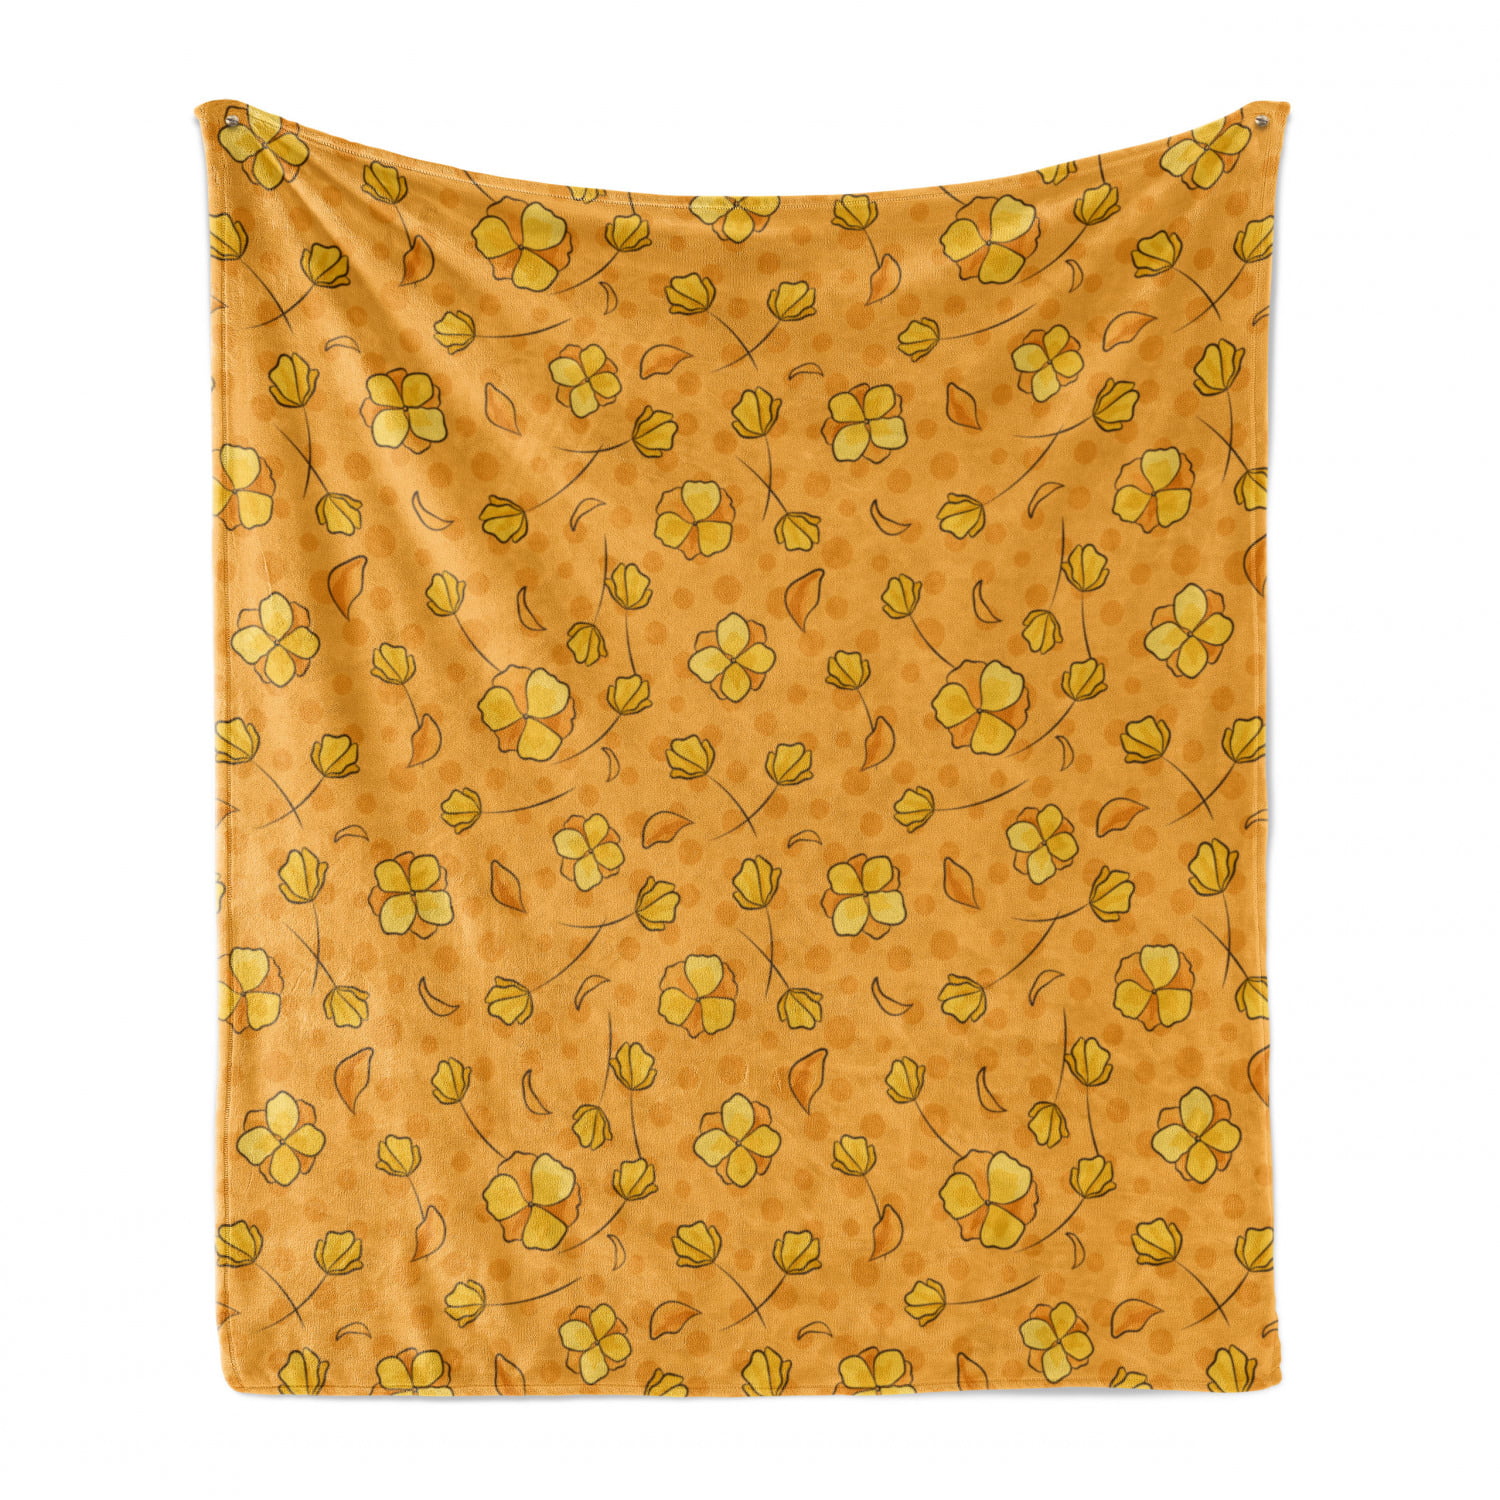 Retro Daisy Pattern with Polka Dot Background Abstract Design Cozy Plush for Indoor and Outdoor Use Brown Pale Seafoam Umber 60 x 80 Ambesonne Brown and Blue Soft Flannel Fleece Throw Blanket 